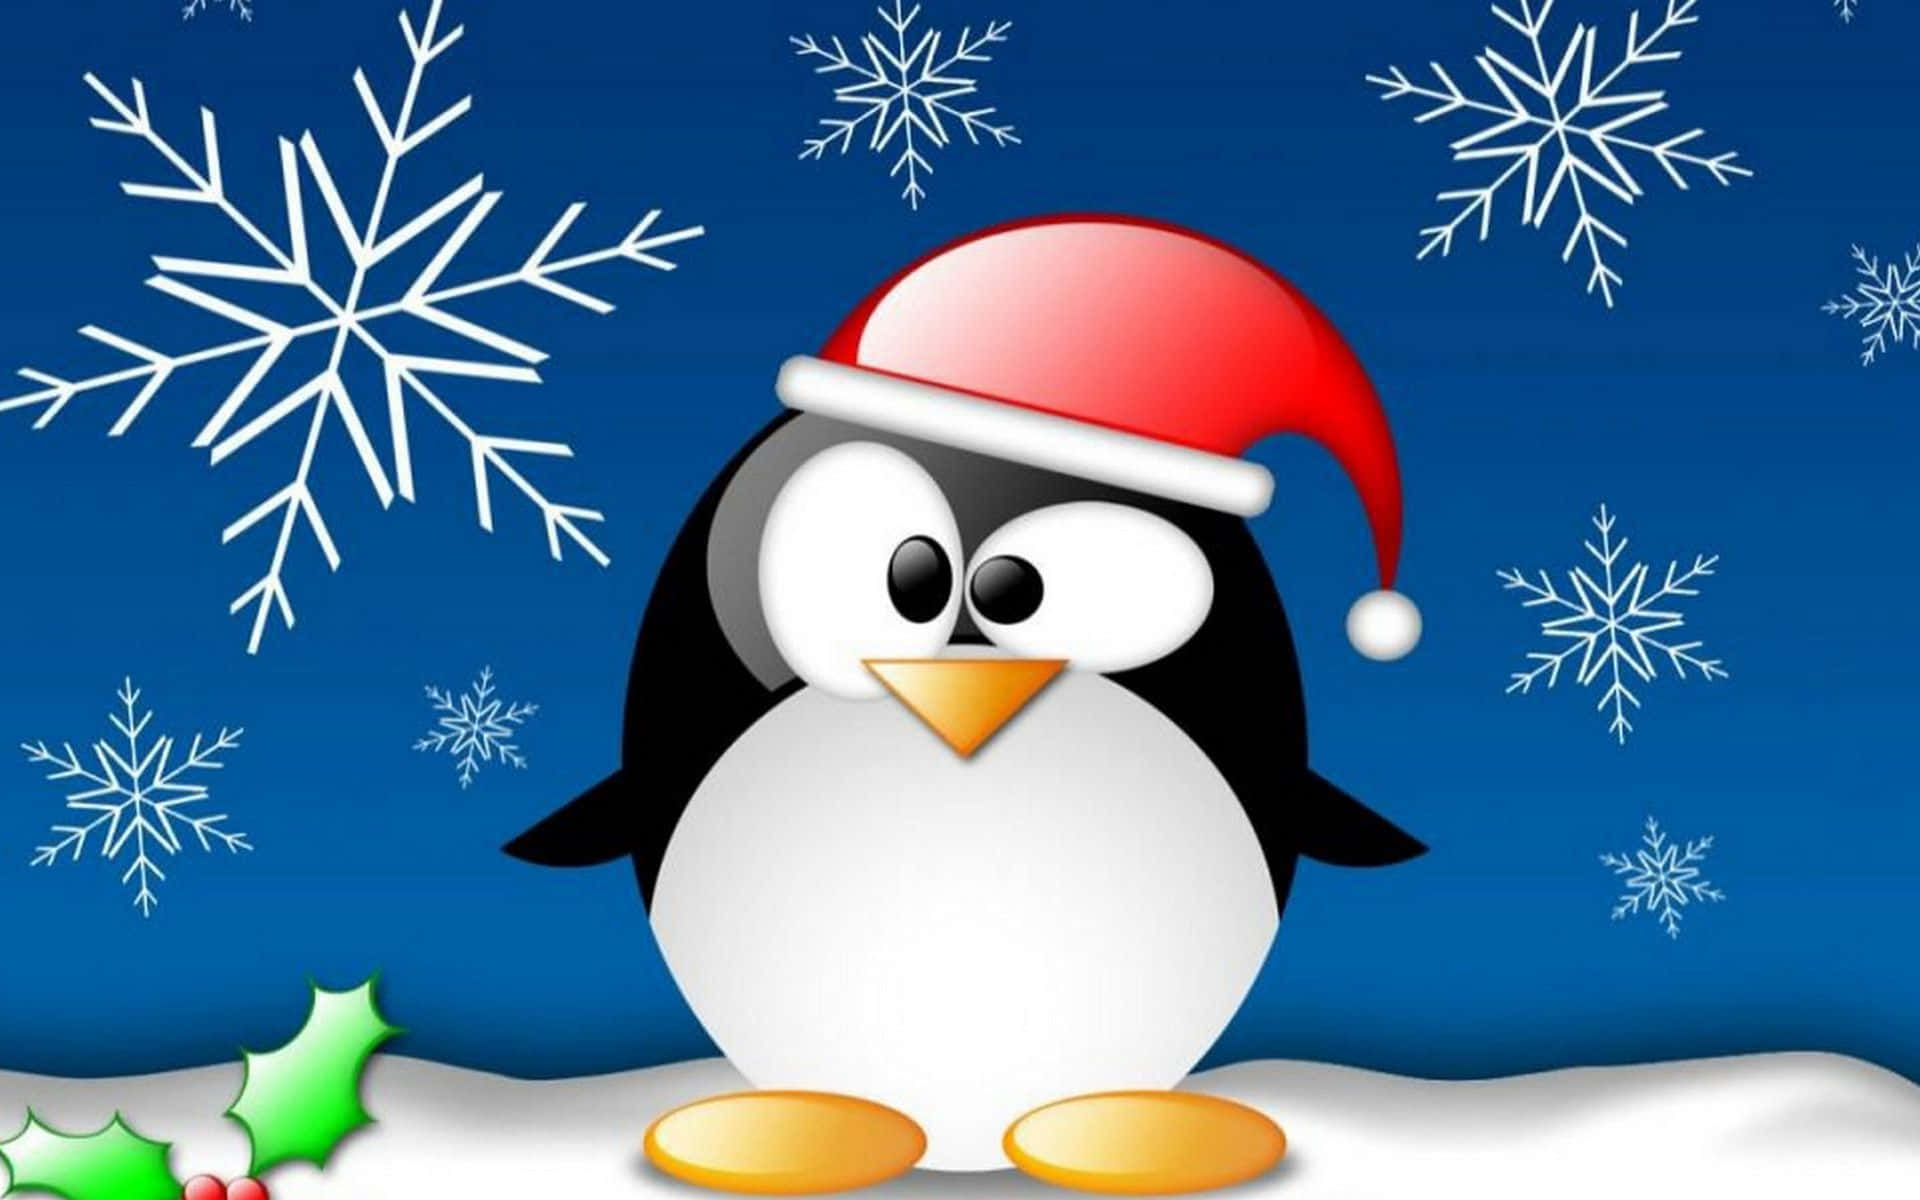 Download Christmas Cartoon Pictures 1920 x 1200 